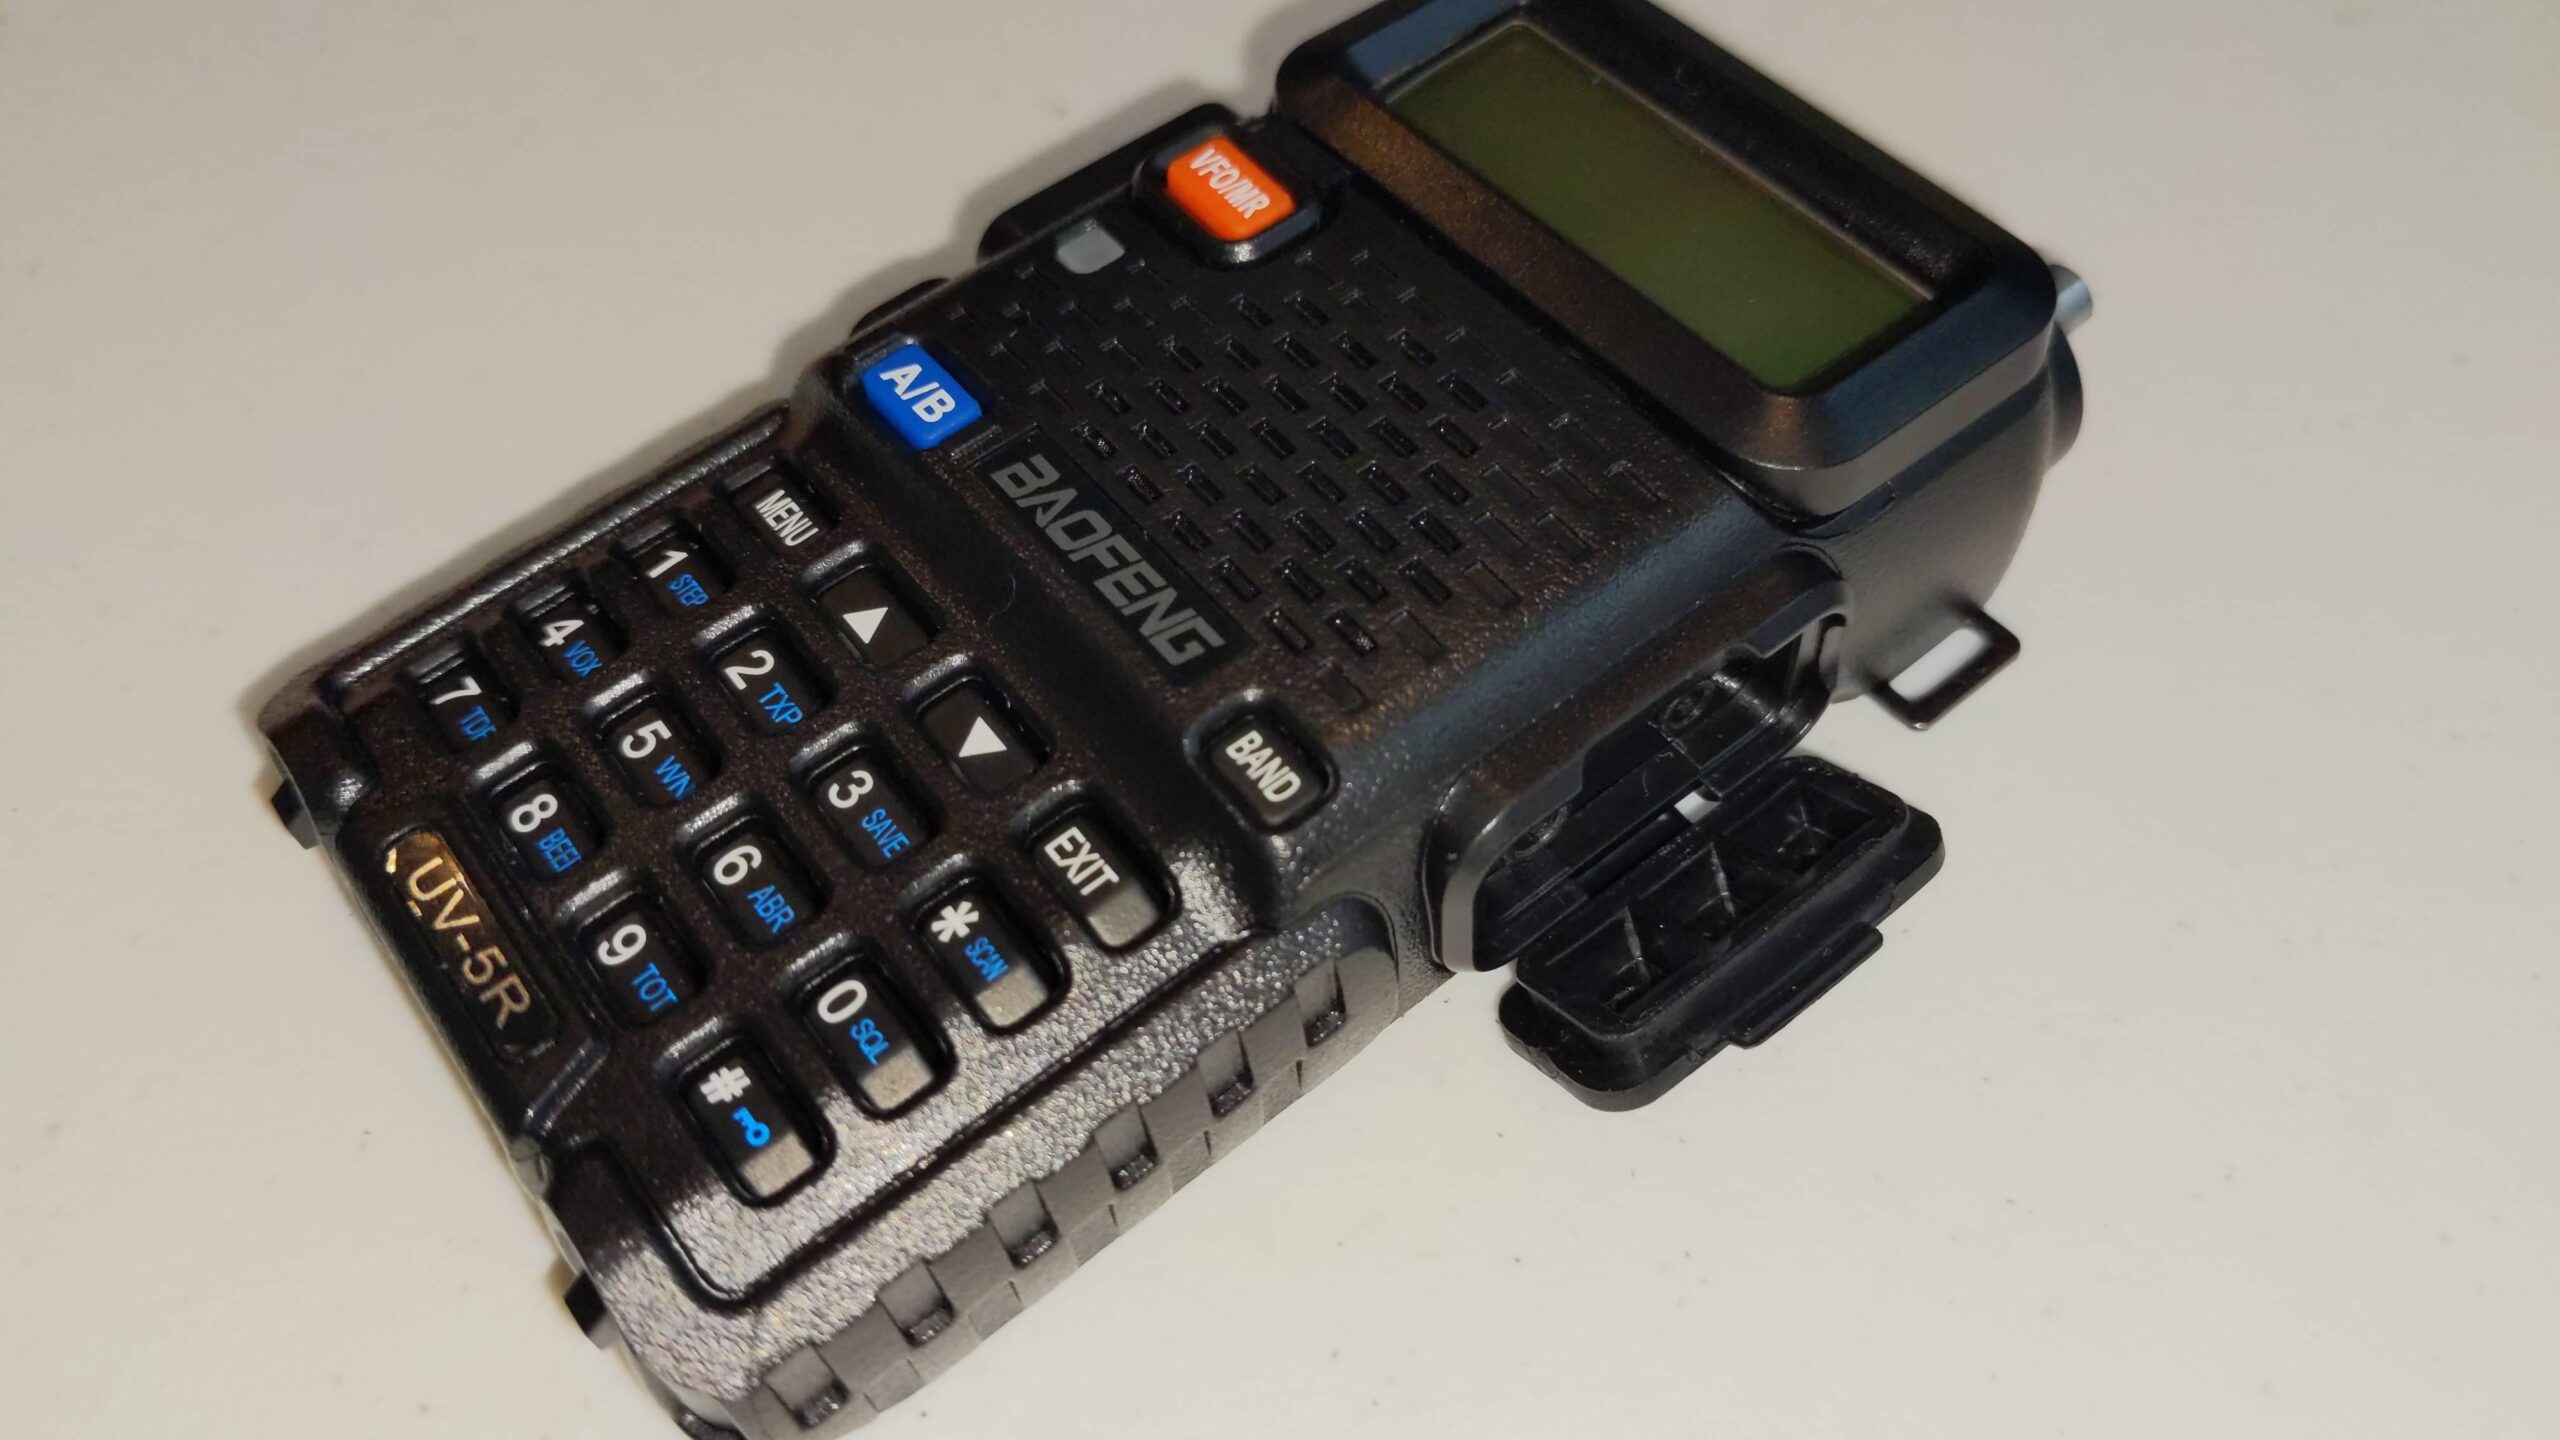 Baofeng UV5R with internals of radio separating from shell